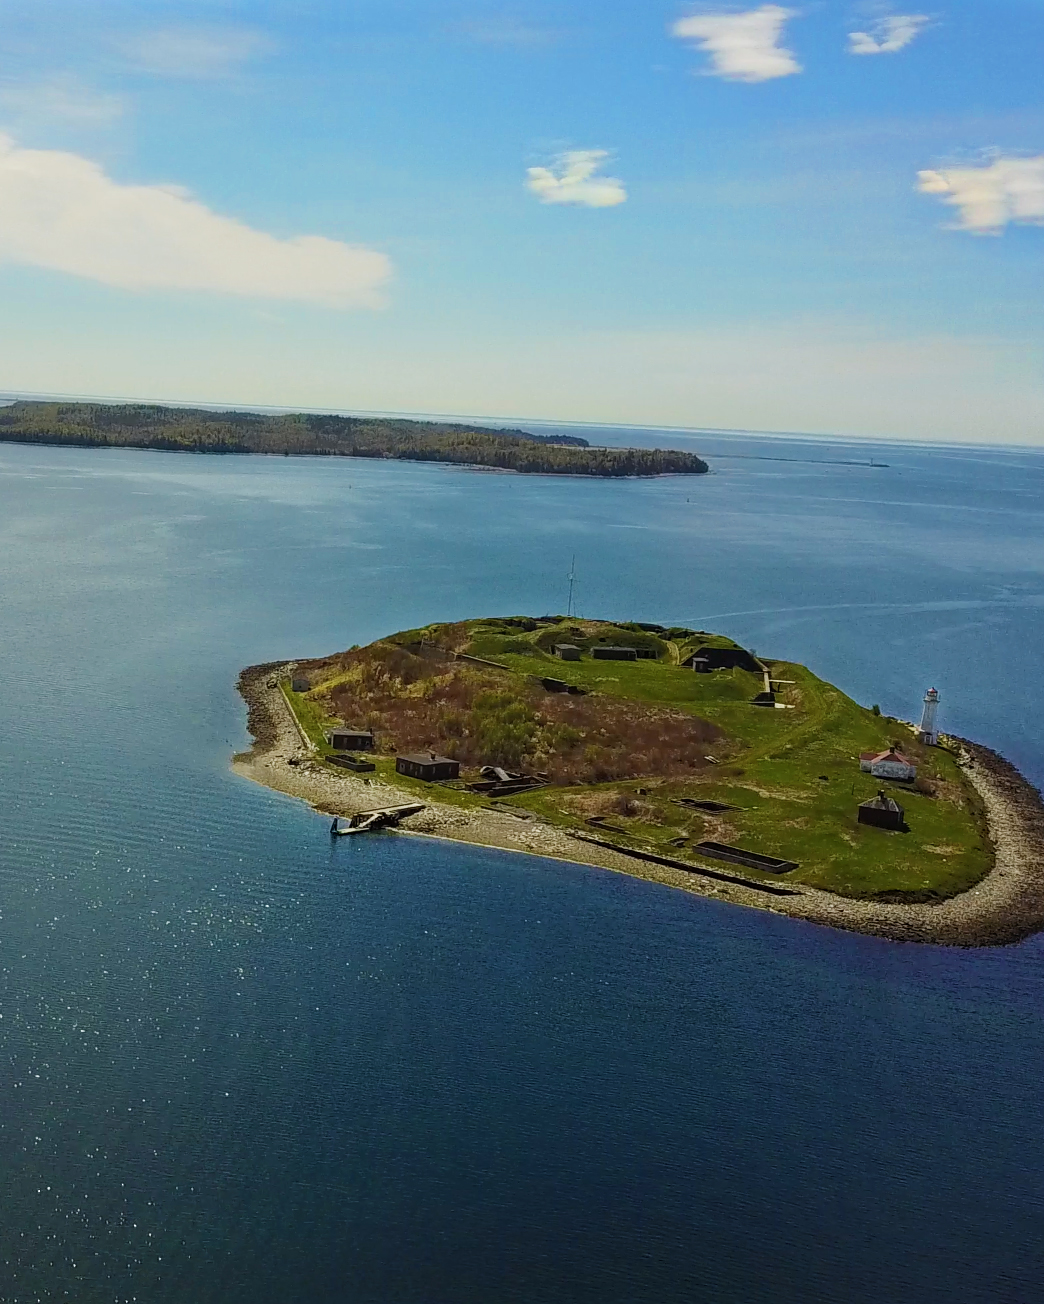 Drone shot over George's Island in Halifax